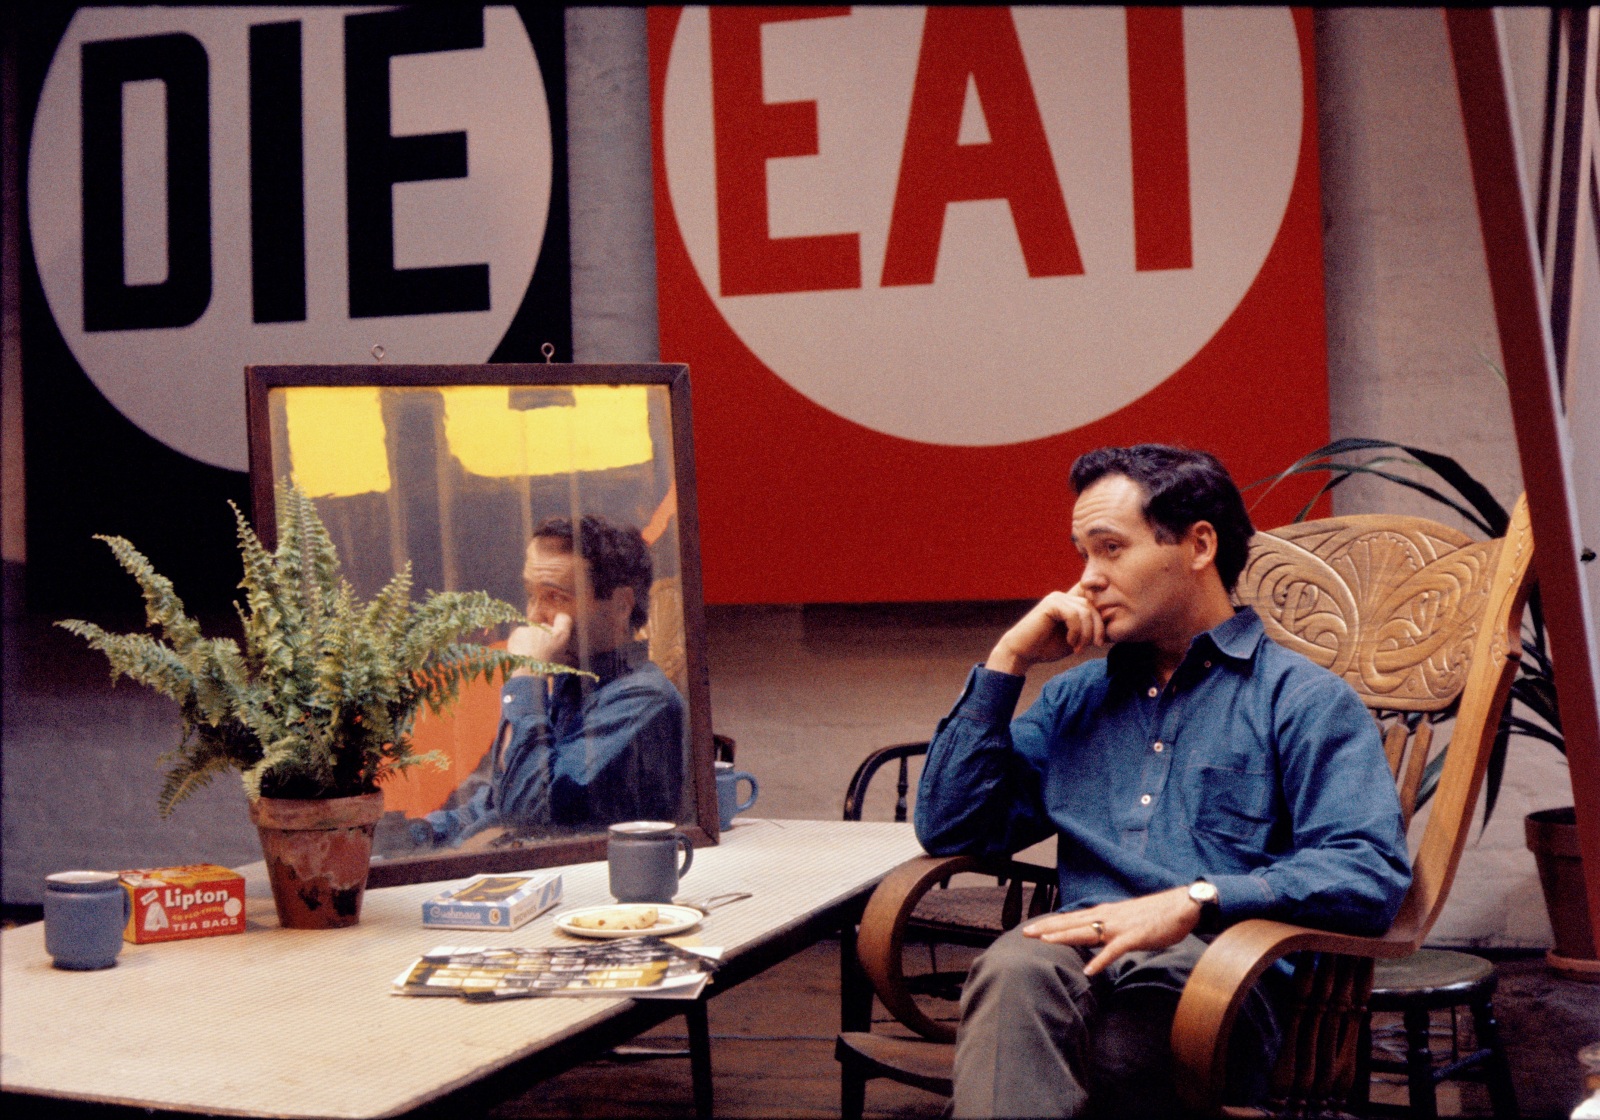 A photograph of Robert Indiana seated. wearing a blue shirt, by a table with a mirror reflecting his image and part of painting panel The Red Diamond Die. Behind him is the painting Eat/Die, a diptych with one canvas consisting of the red word eat in a white circle against a red ground, and the other the black word die in a white circle against a black ground.